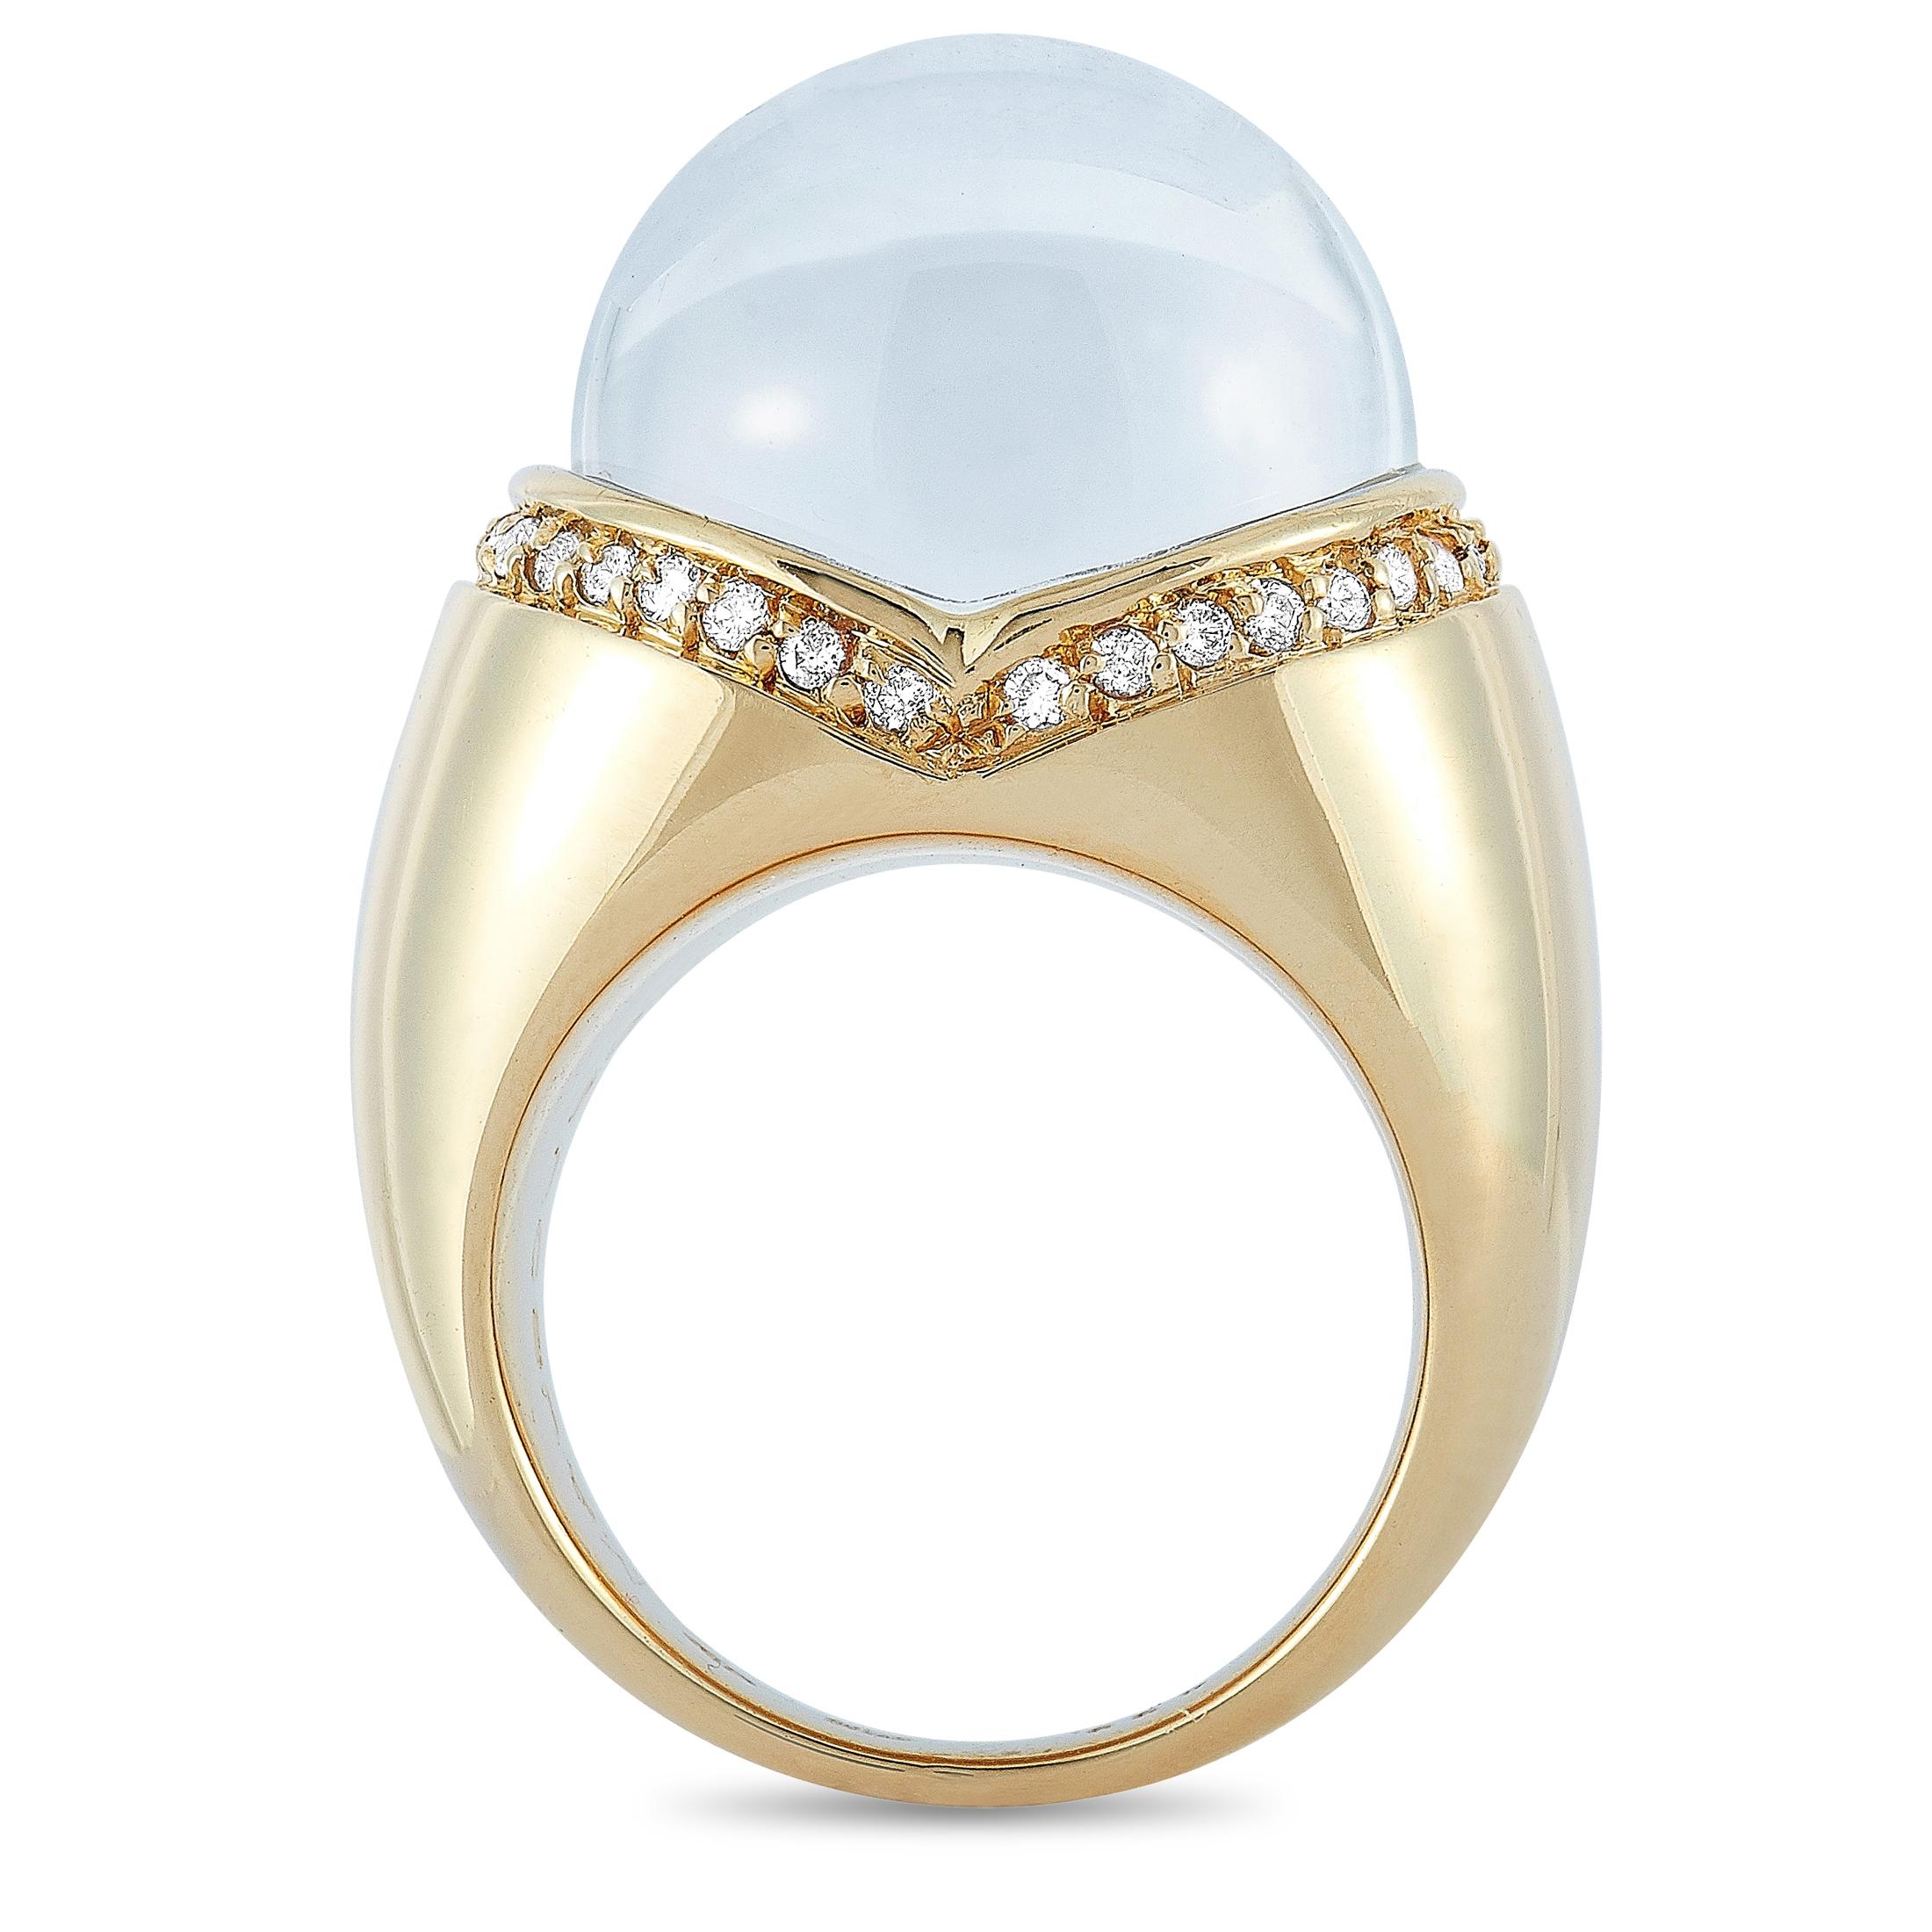 This Mauboussin ring is made of 18K yellow gold and embellished with diamonds and a rock crystal. The ring weighs 22.5 grams and boasts band thickness of 3 mm and top height of 15 mm, while top dimensions measure 19 by 15 mm.
Ring Size: 6

Offered